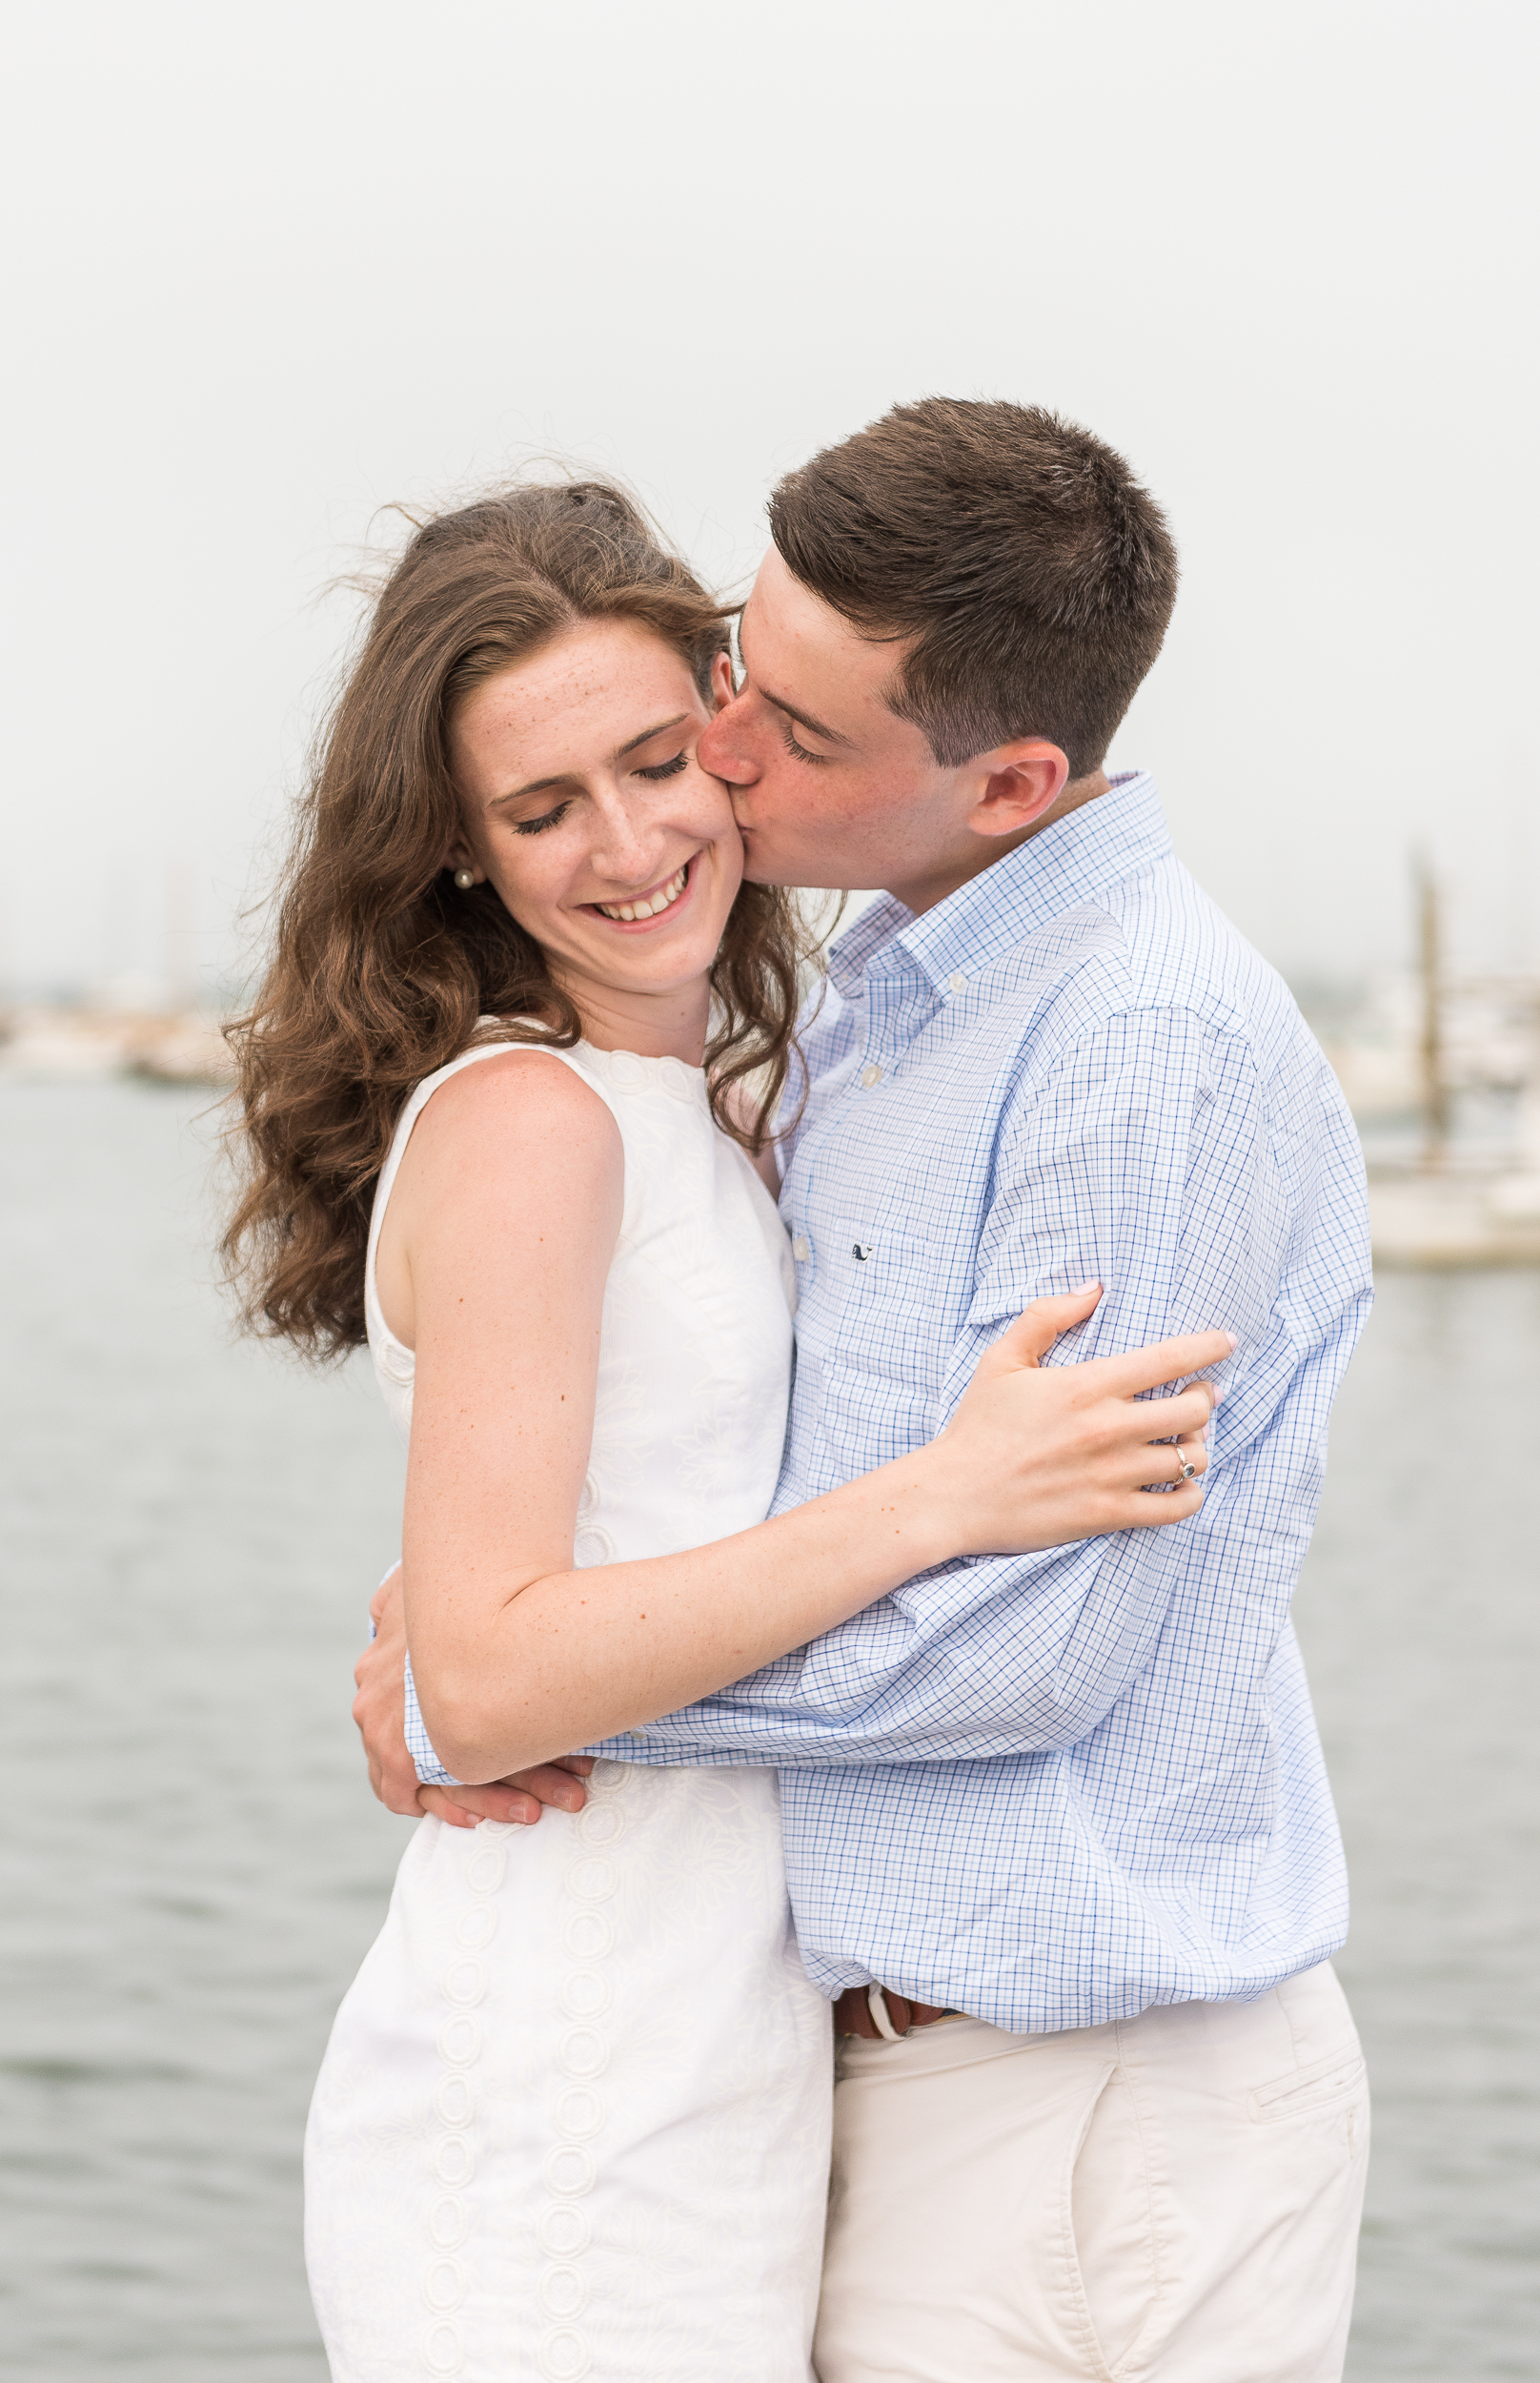 Vow Renewal at the Nantucket White Elephant